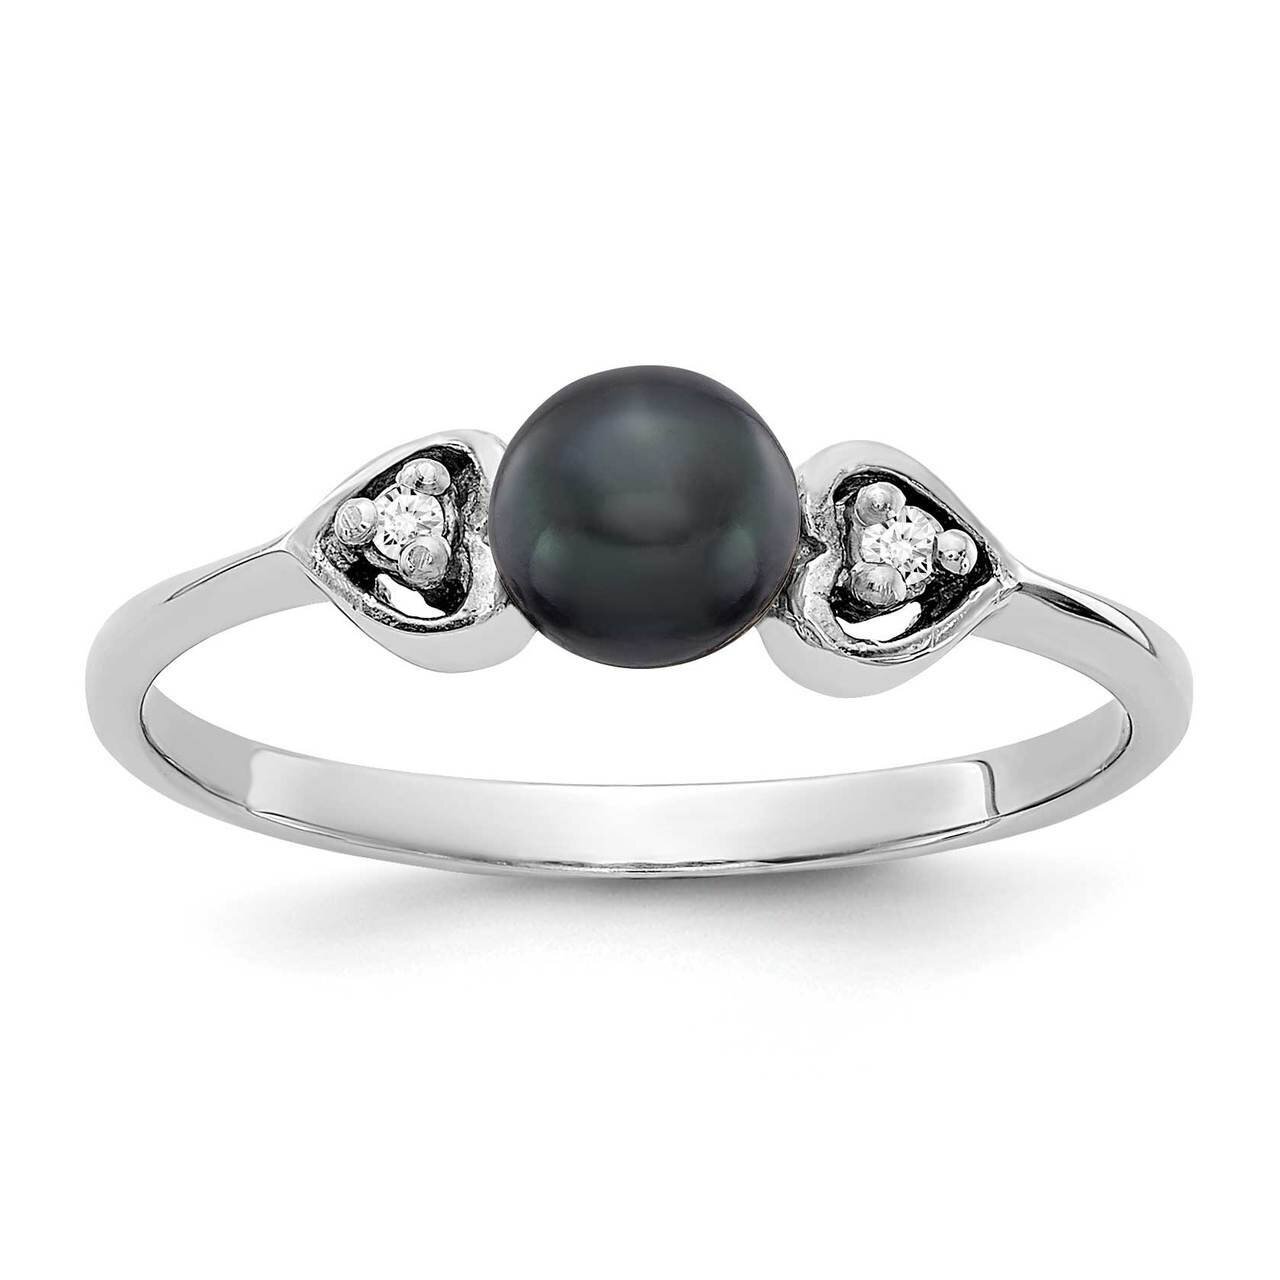 4.5mm Black Freshwater Cultured Pearl Diamond Ring 14k White Gold Y1937BP_AA